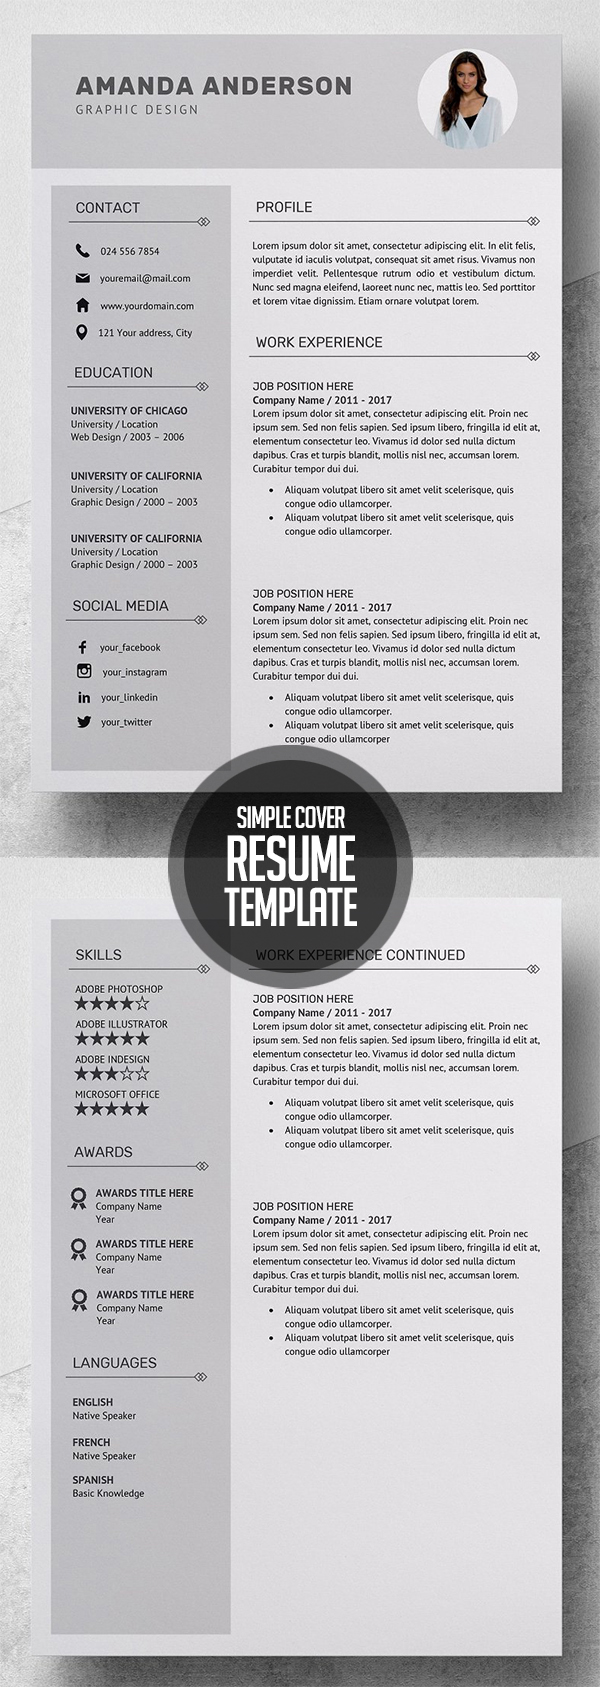 Simple Resume CV Template + Cover Letter